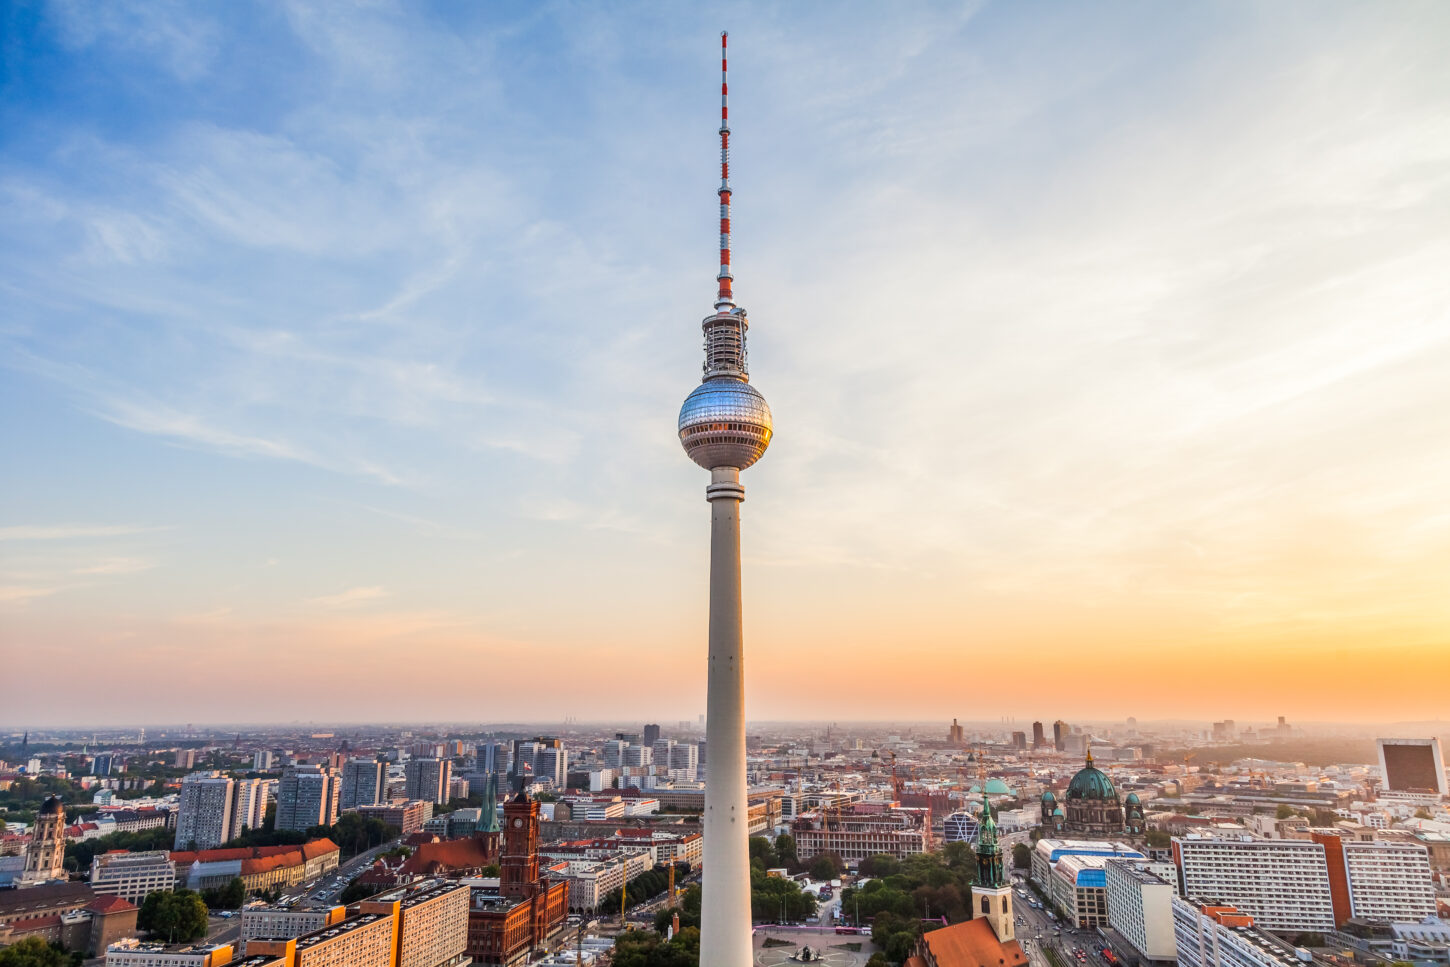 View of Berlin TV tower on Alexanderplatz, Berlin, Germany, from above the rooftops, with an orange sunset in the background